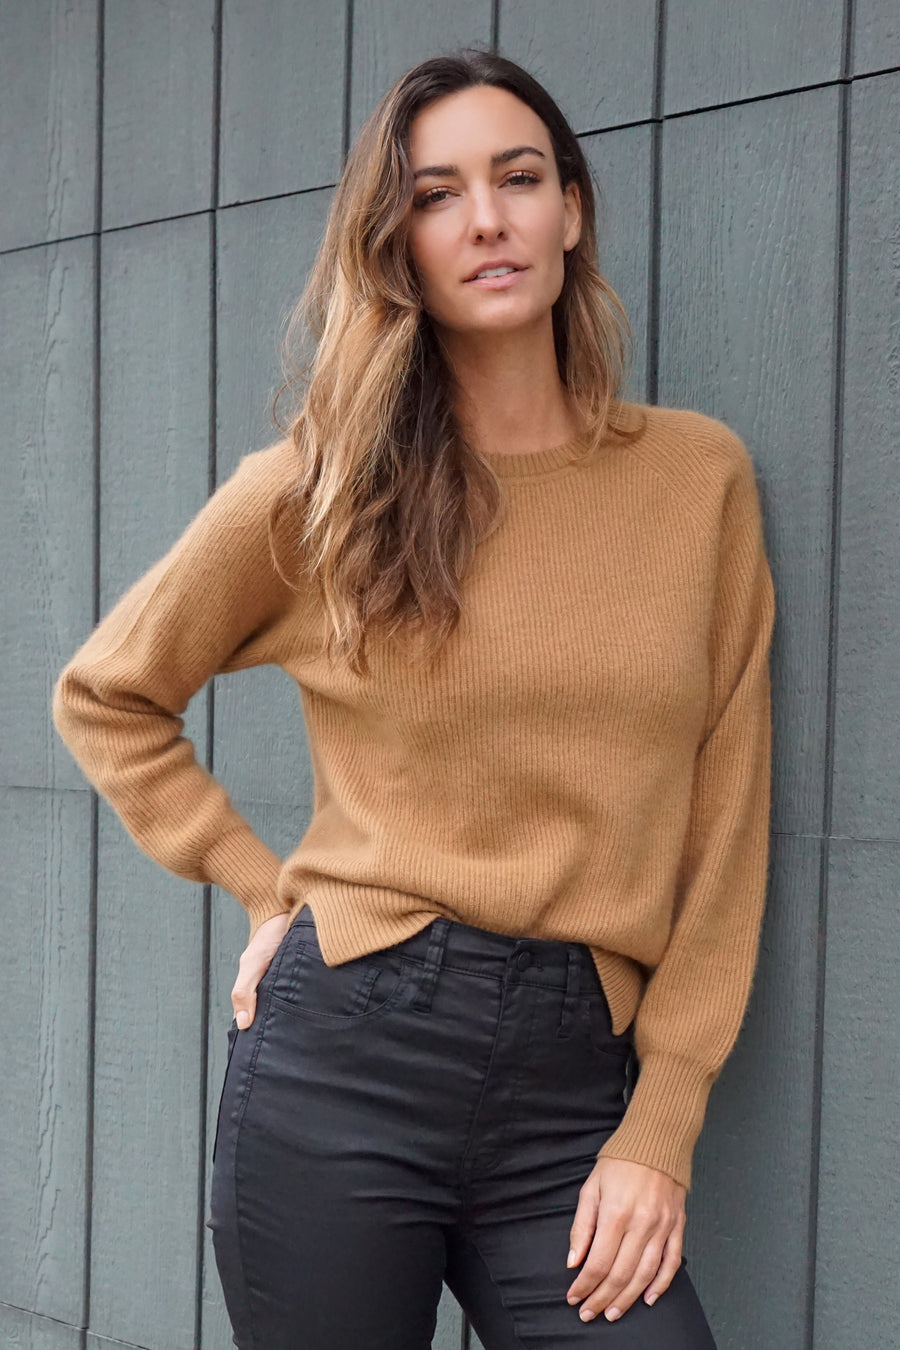 pine cashmere betsy trendy women's 100% pure cashmere crewneck sweater in camel